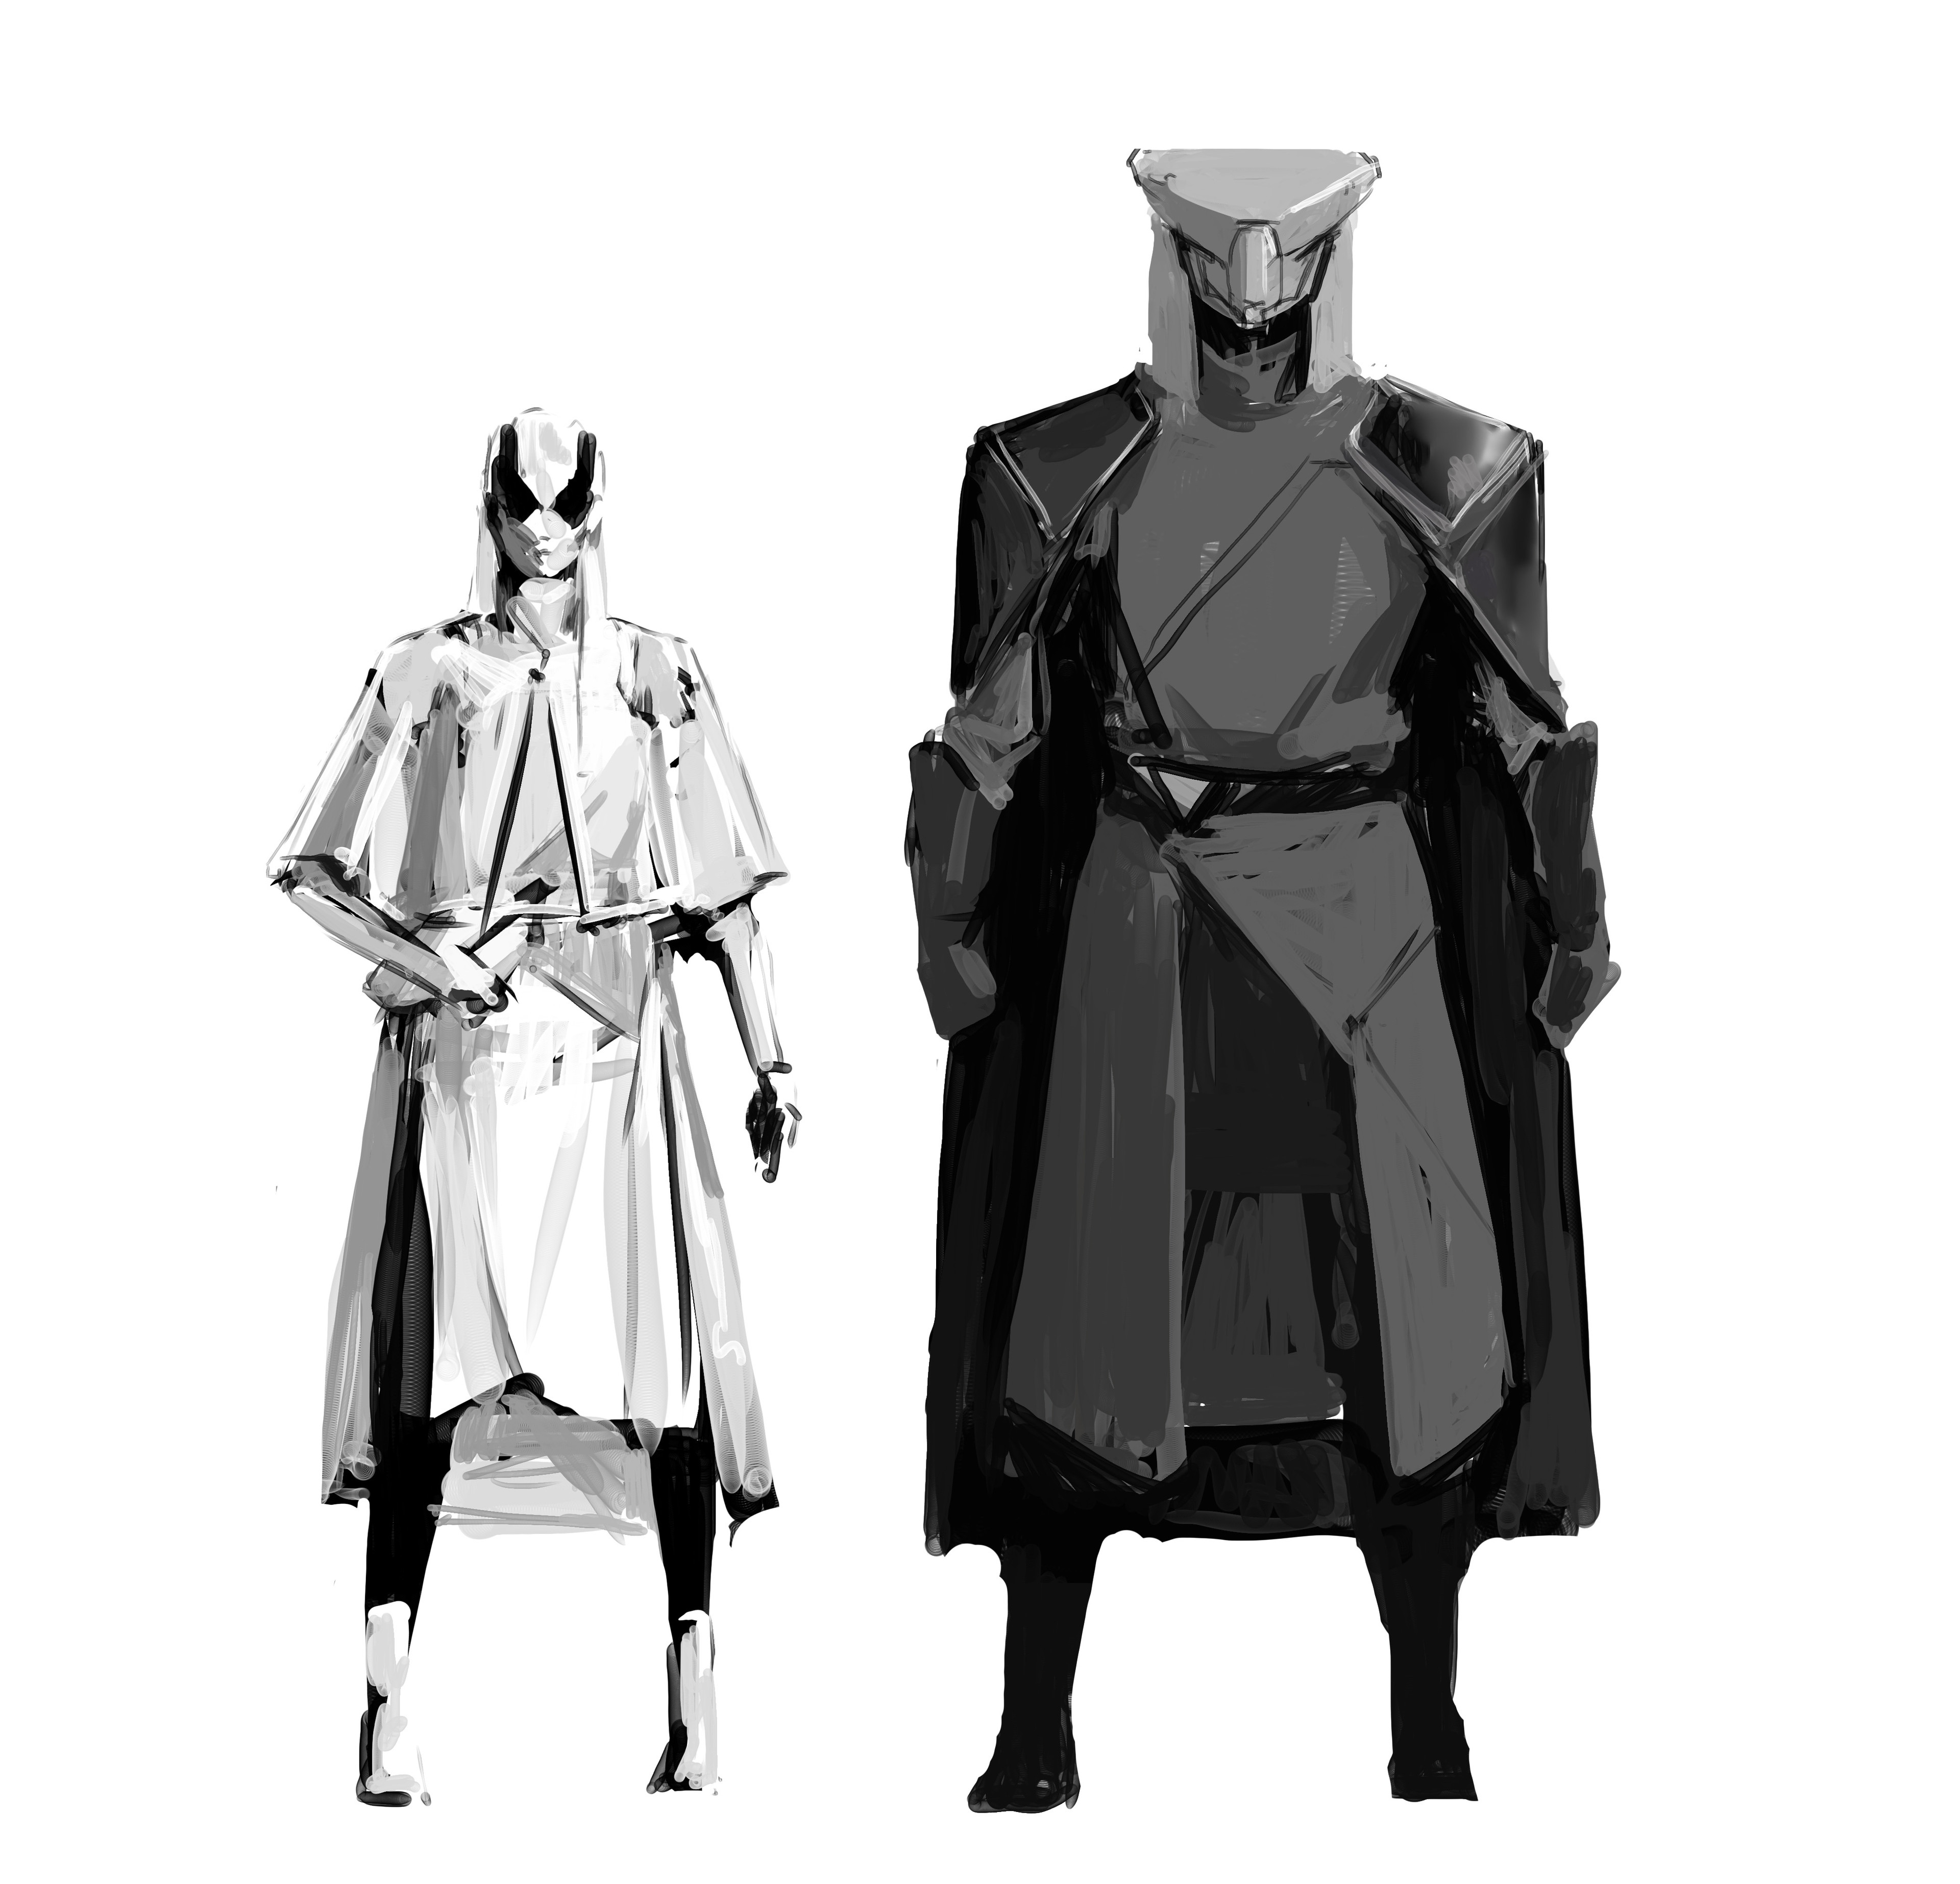 Rough Character Designs